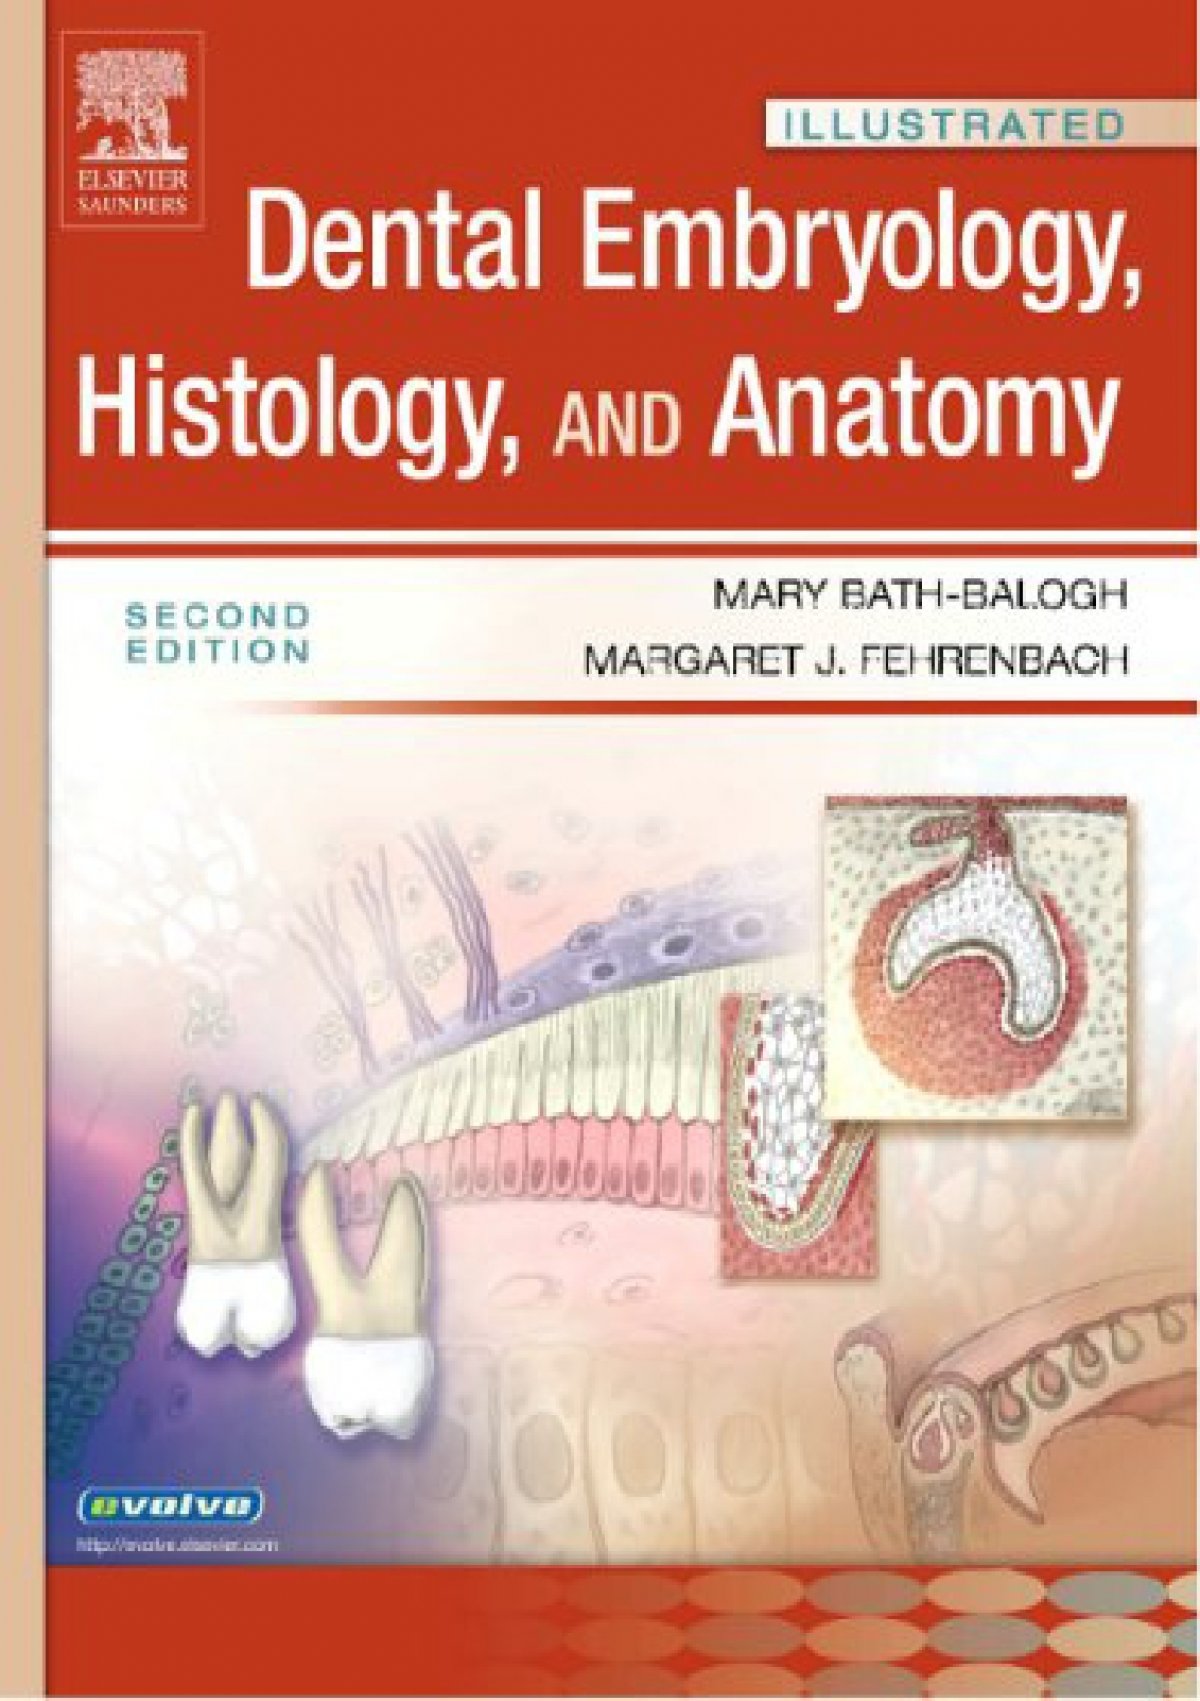 illustrated dental embryology histology and anatomy pdf free download